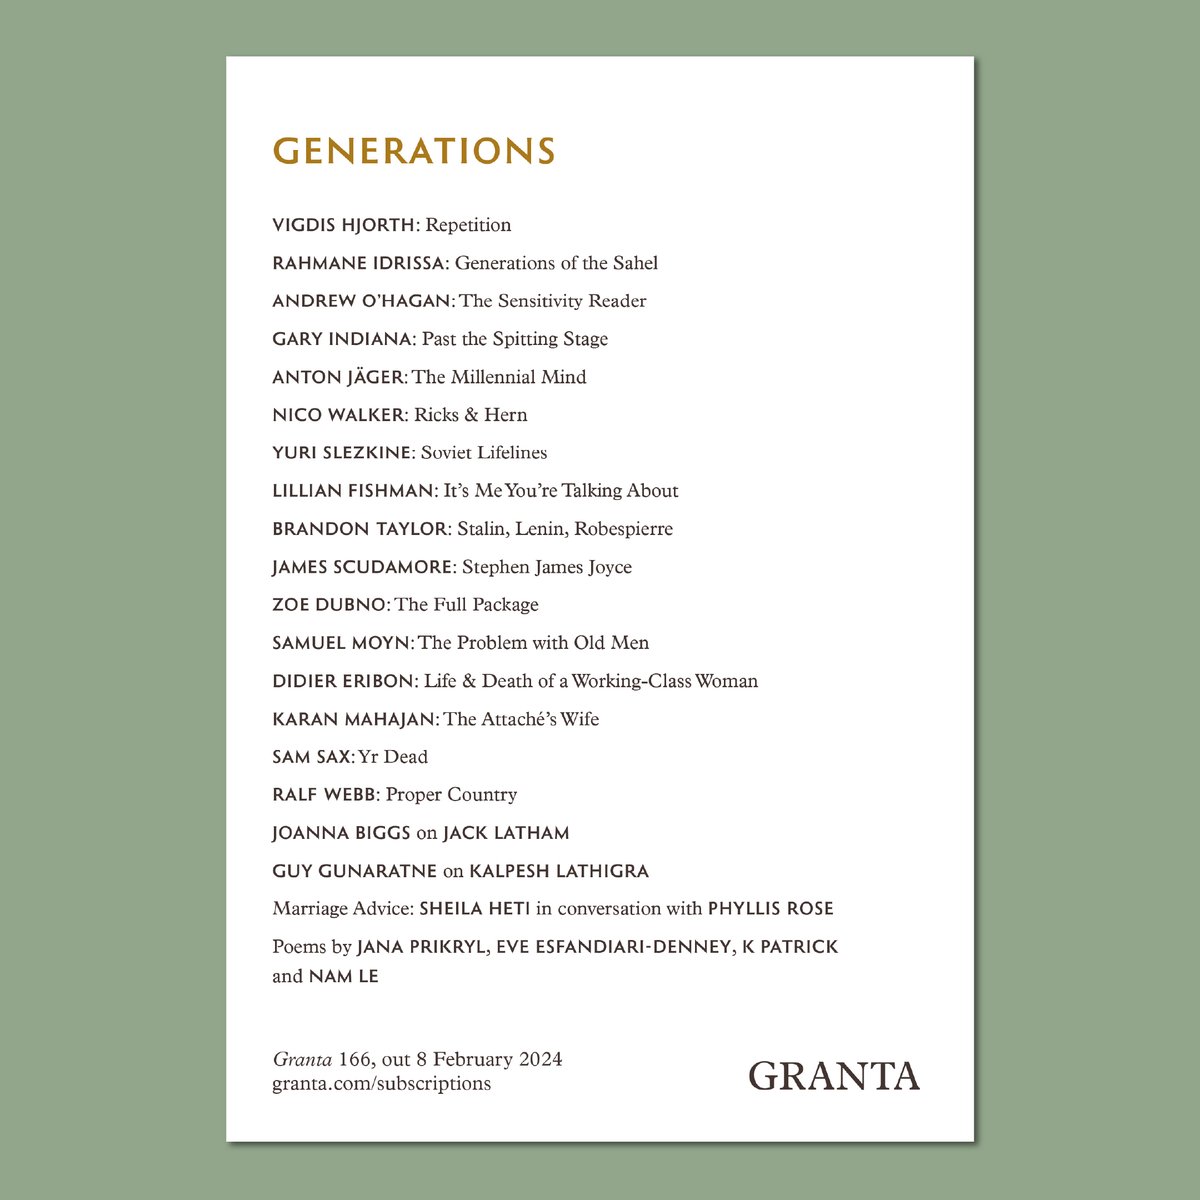 We are delighted to announce the contributors to the latest edition of Granta. From the public pools of New York to Niamey in the 1960s, a carol concert in Oslo to working-class Reims, Granta 166 reflects on a much derided yet indispensable topic: Generations.